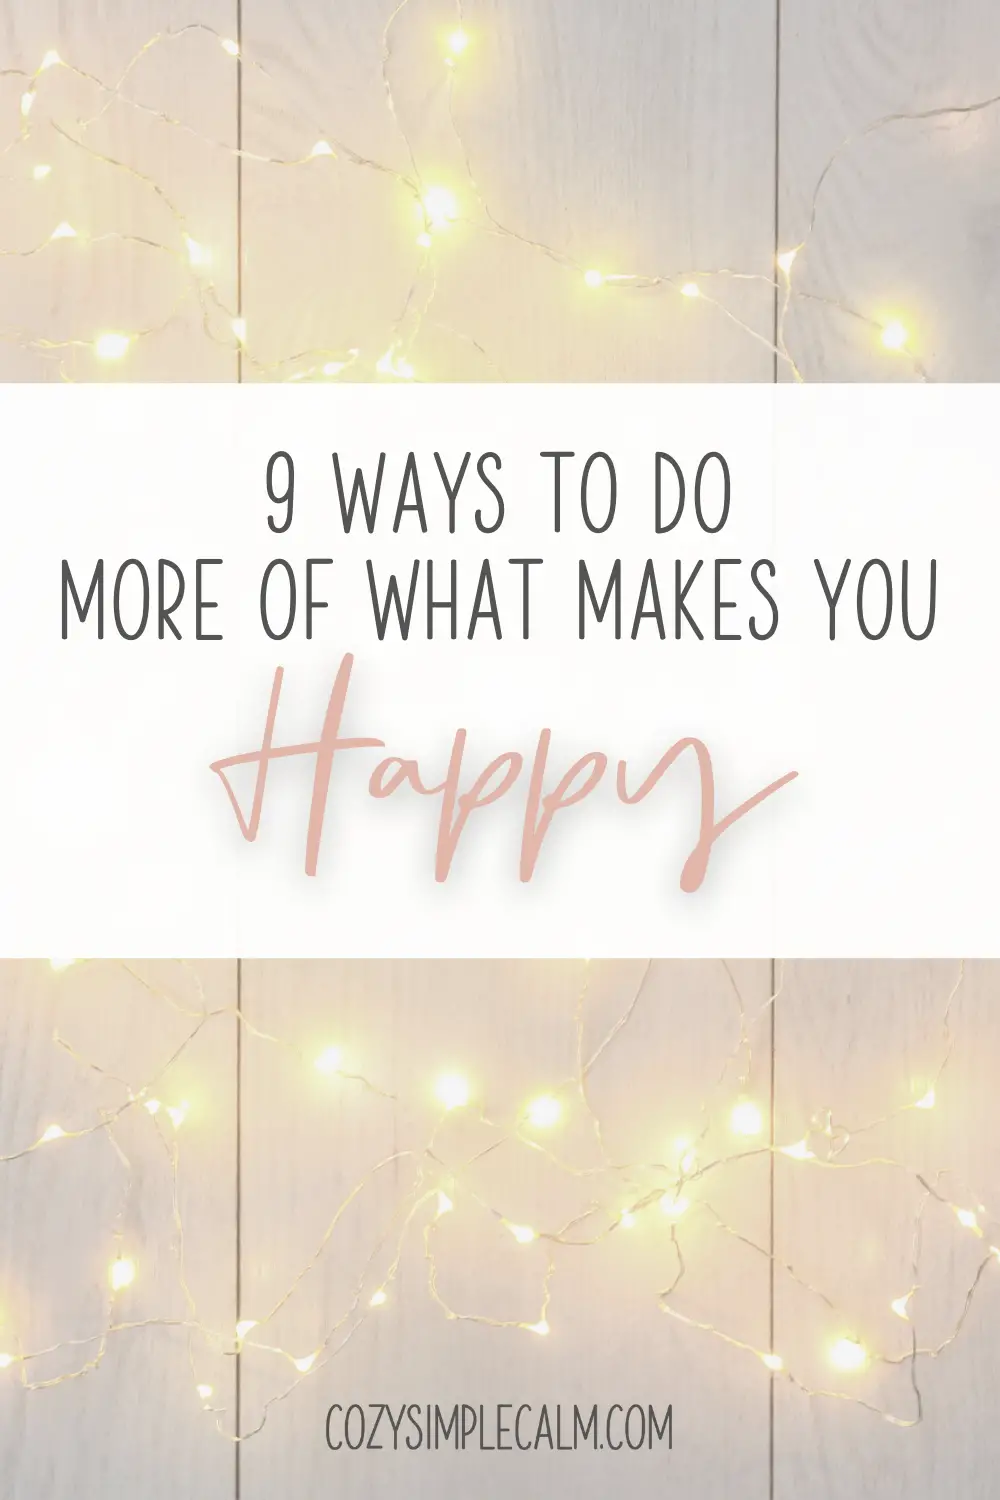 Background image of white christmas lights - Text overlay: 9 ways to do more of what makes you happy